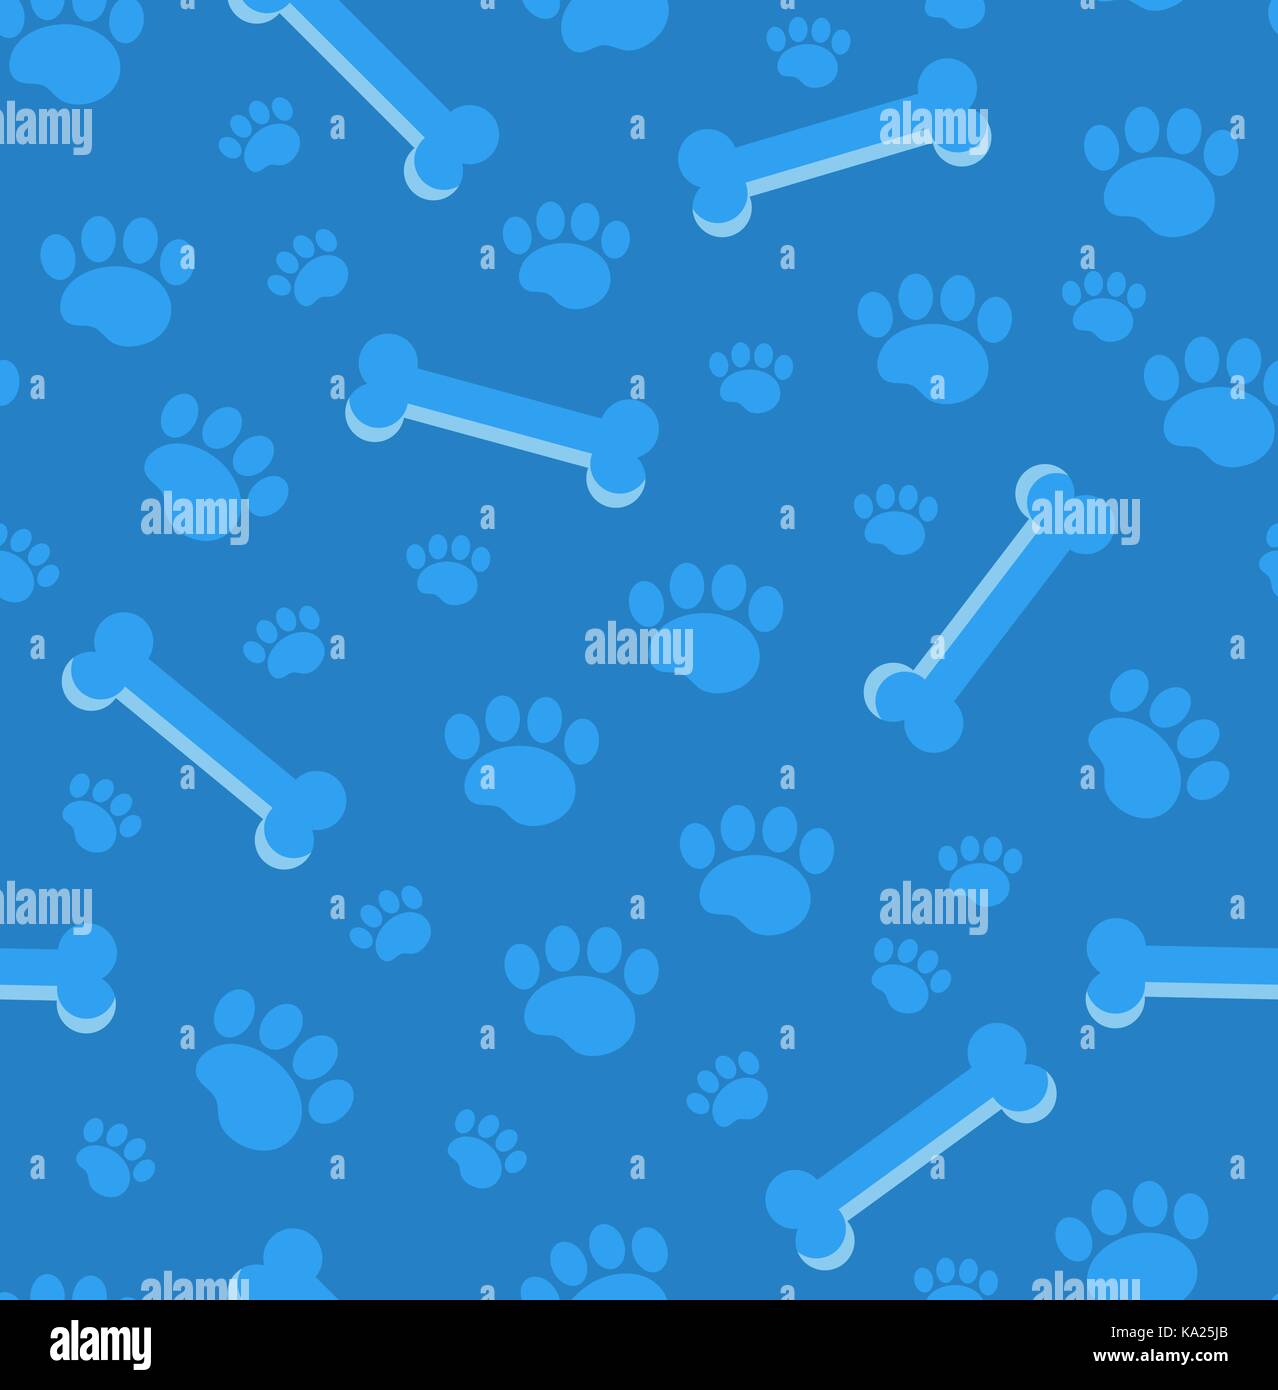 Dog bones seamless pattern. Bone and traces of puppy paws repetitive